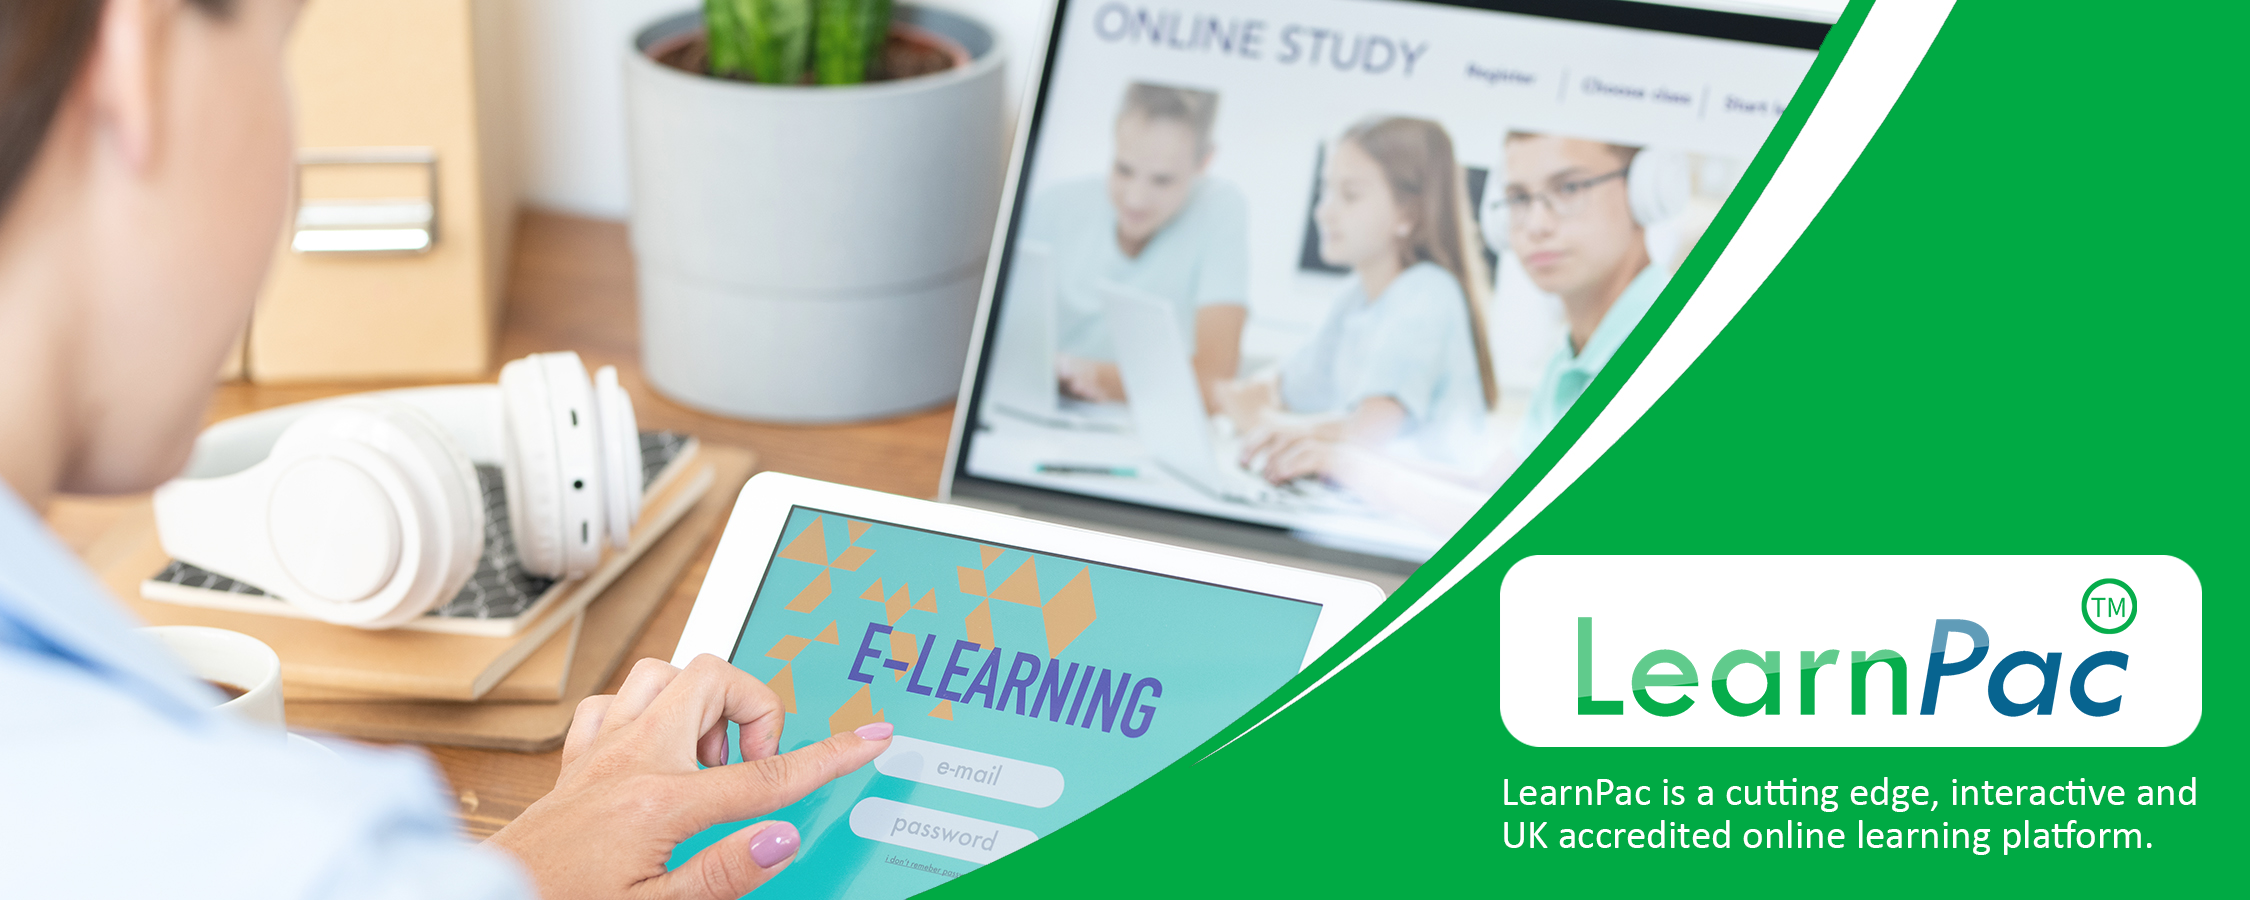 Documentation and Record-Keeping - Online Learning Courses - E-Learning Courses - LearnPac Systems UK -